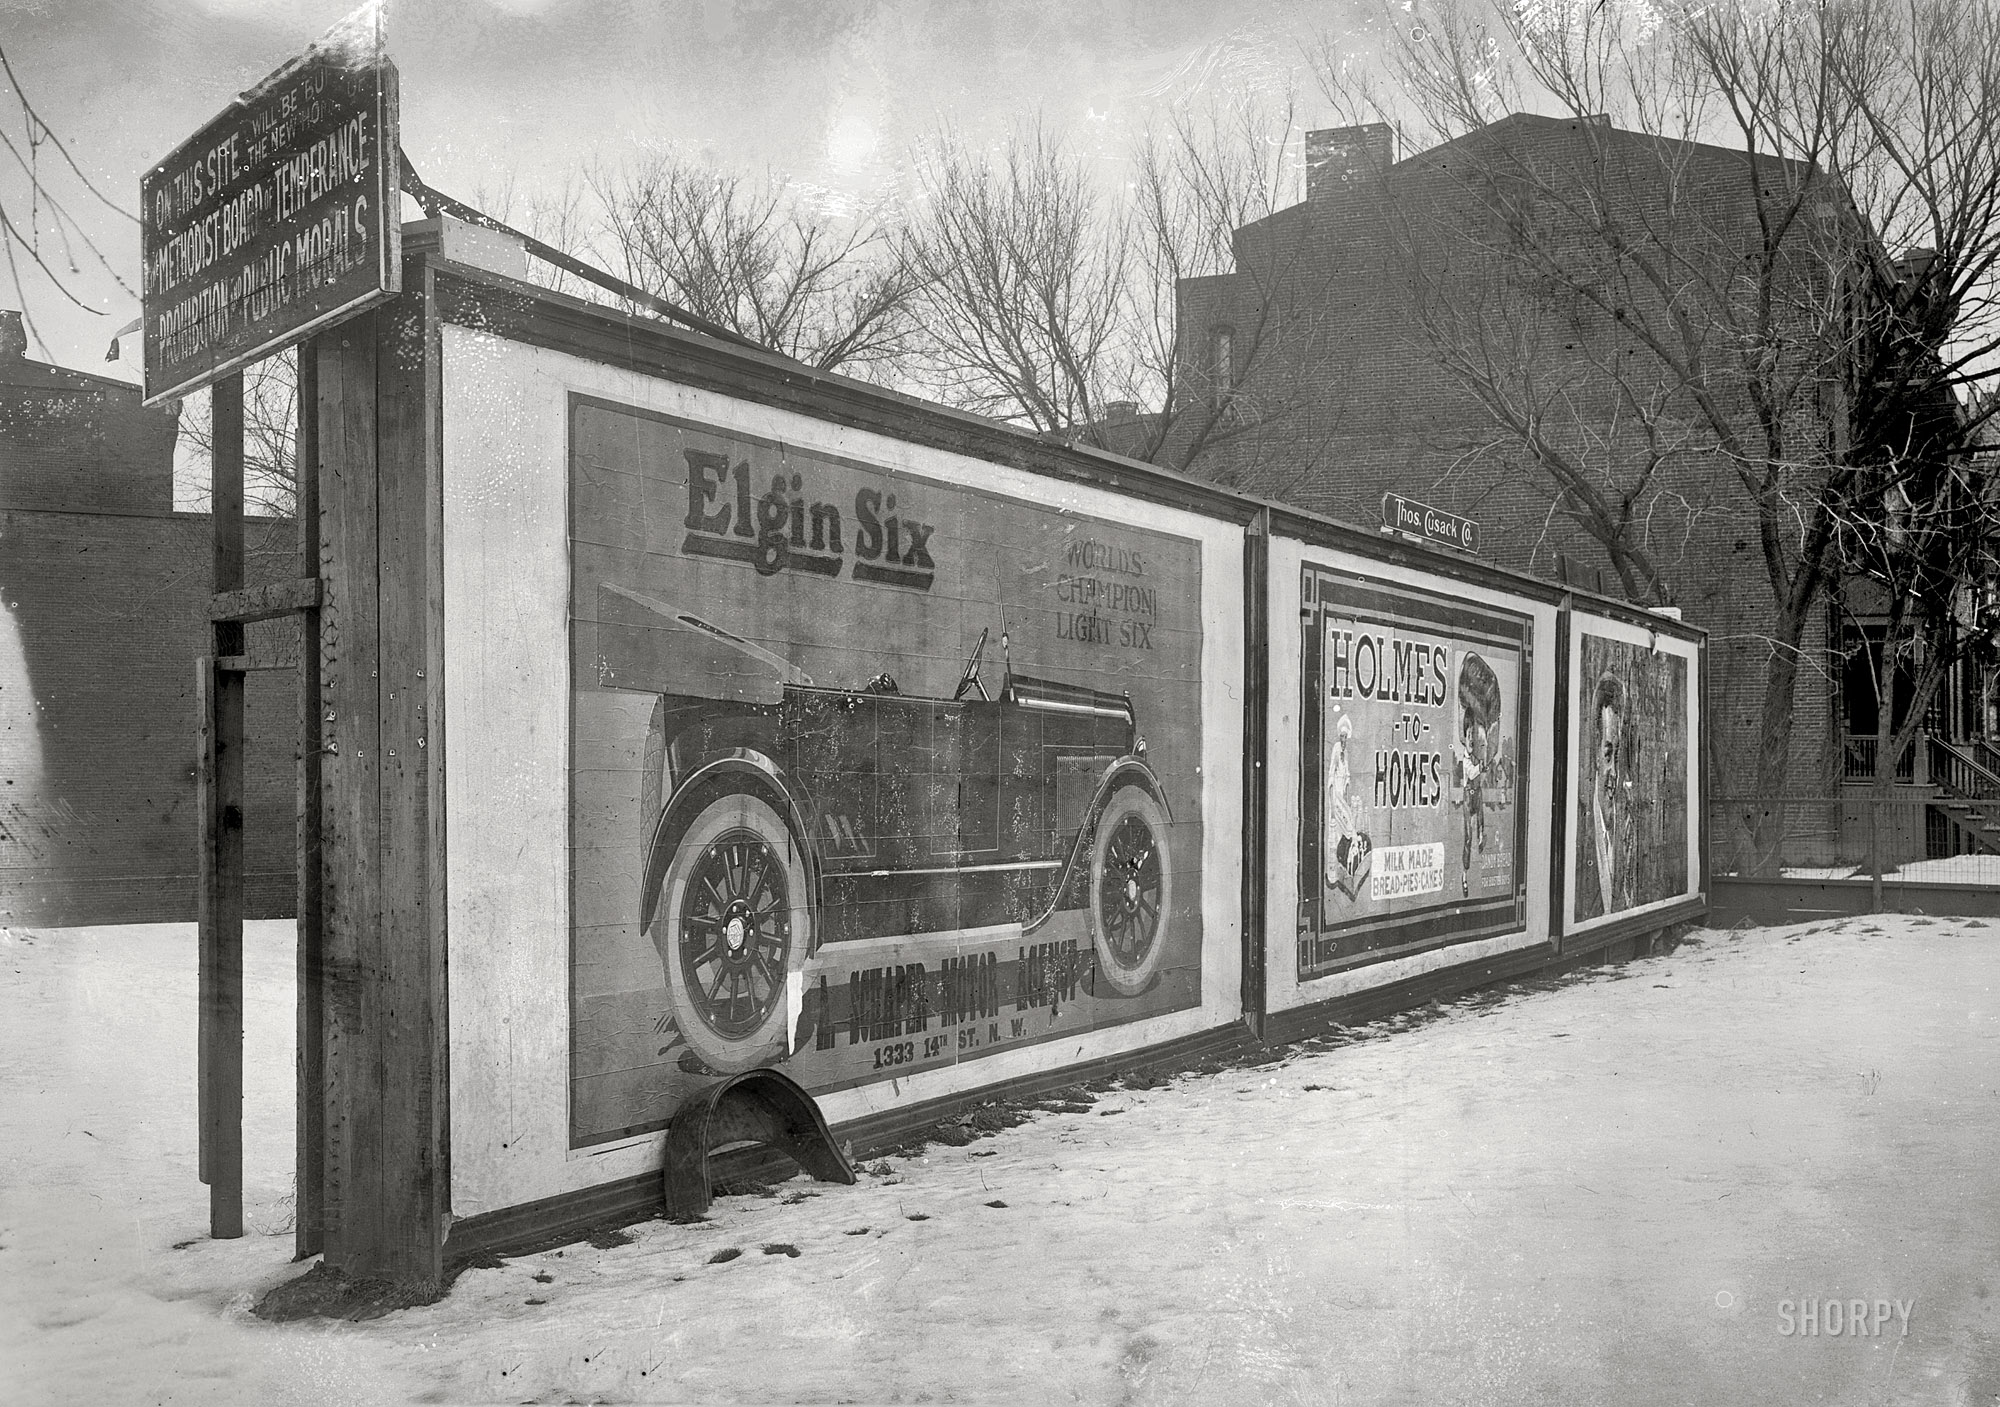 Washington, D.C., circa 1920. "Wamsley billboard." While pondering the postworthiness of this moldy old glass negative, I noticed the small sign appended to the big one: "On this site will be the new home of the Methodist Board of Temperance, Prohibition and Public Morals." And therein lies a tale, having to do with the Chesterfield ad at the far end of the billboard. Which seems to have caused some embarrassment for the temperance board, who owned this property and was profiting from the advertisement for the "weed," despite tobacco being one of the vices it aimed to stamp out. After all that research I still don't know who Wamsley was. National Photo Company glass negative. View full size.